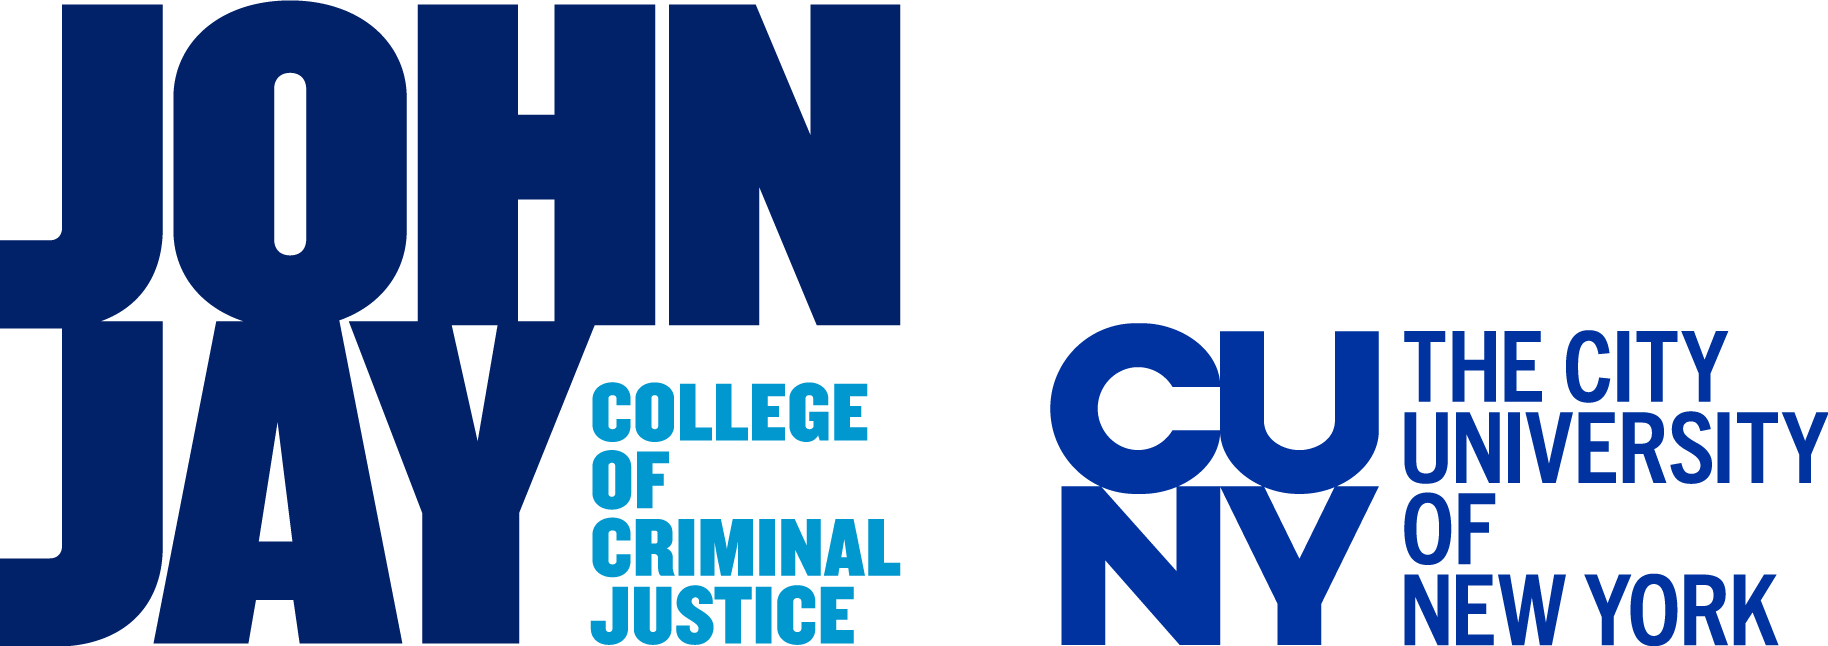 John Jay College of Criminal Justice, The City University of New York